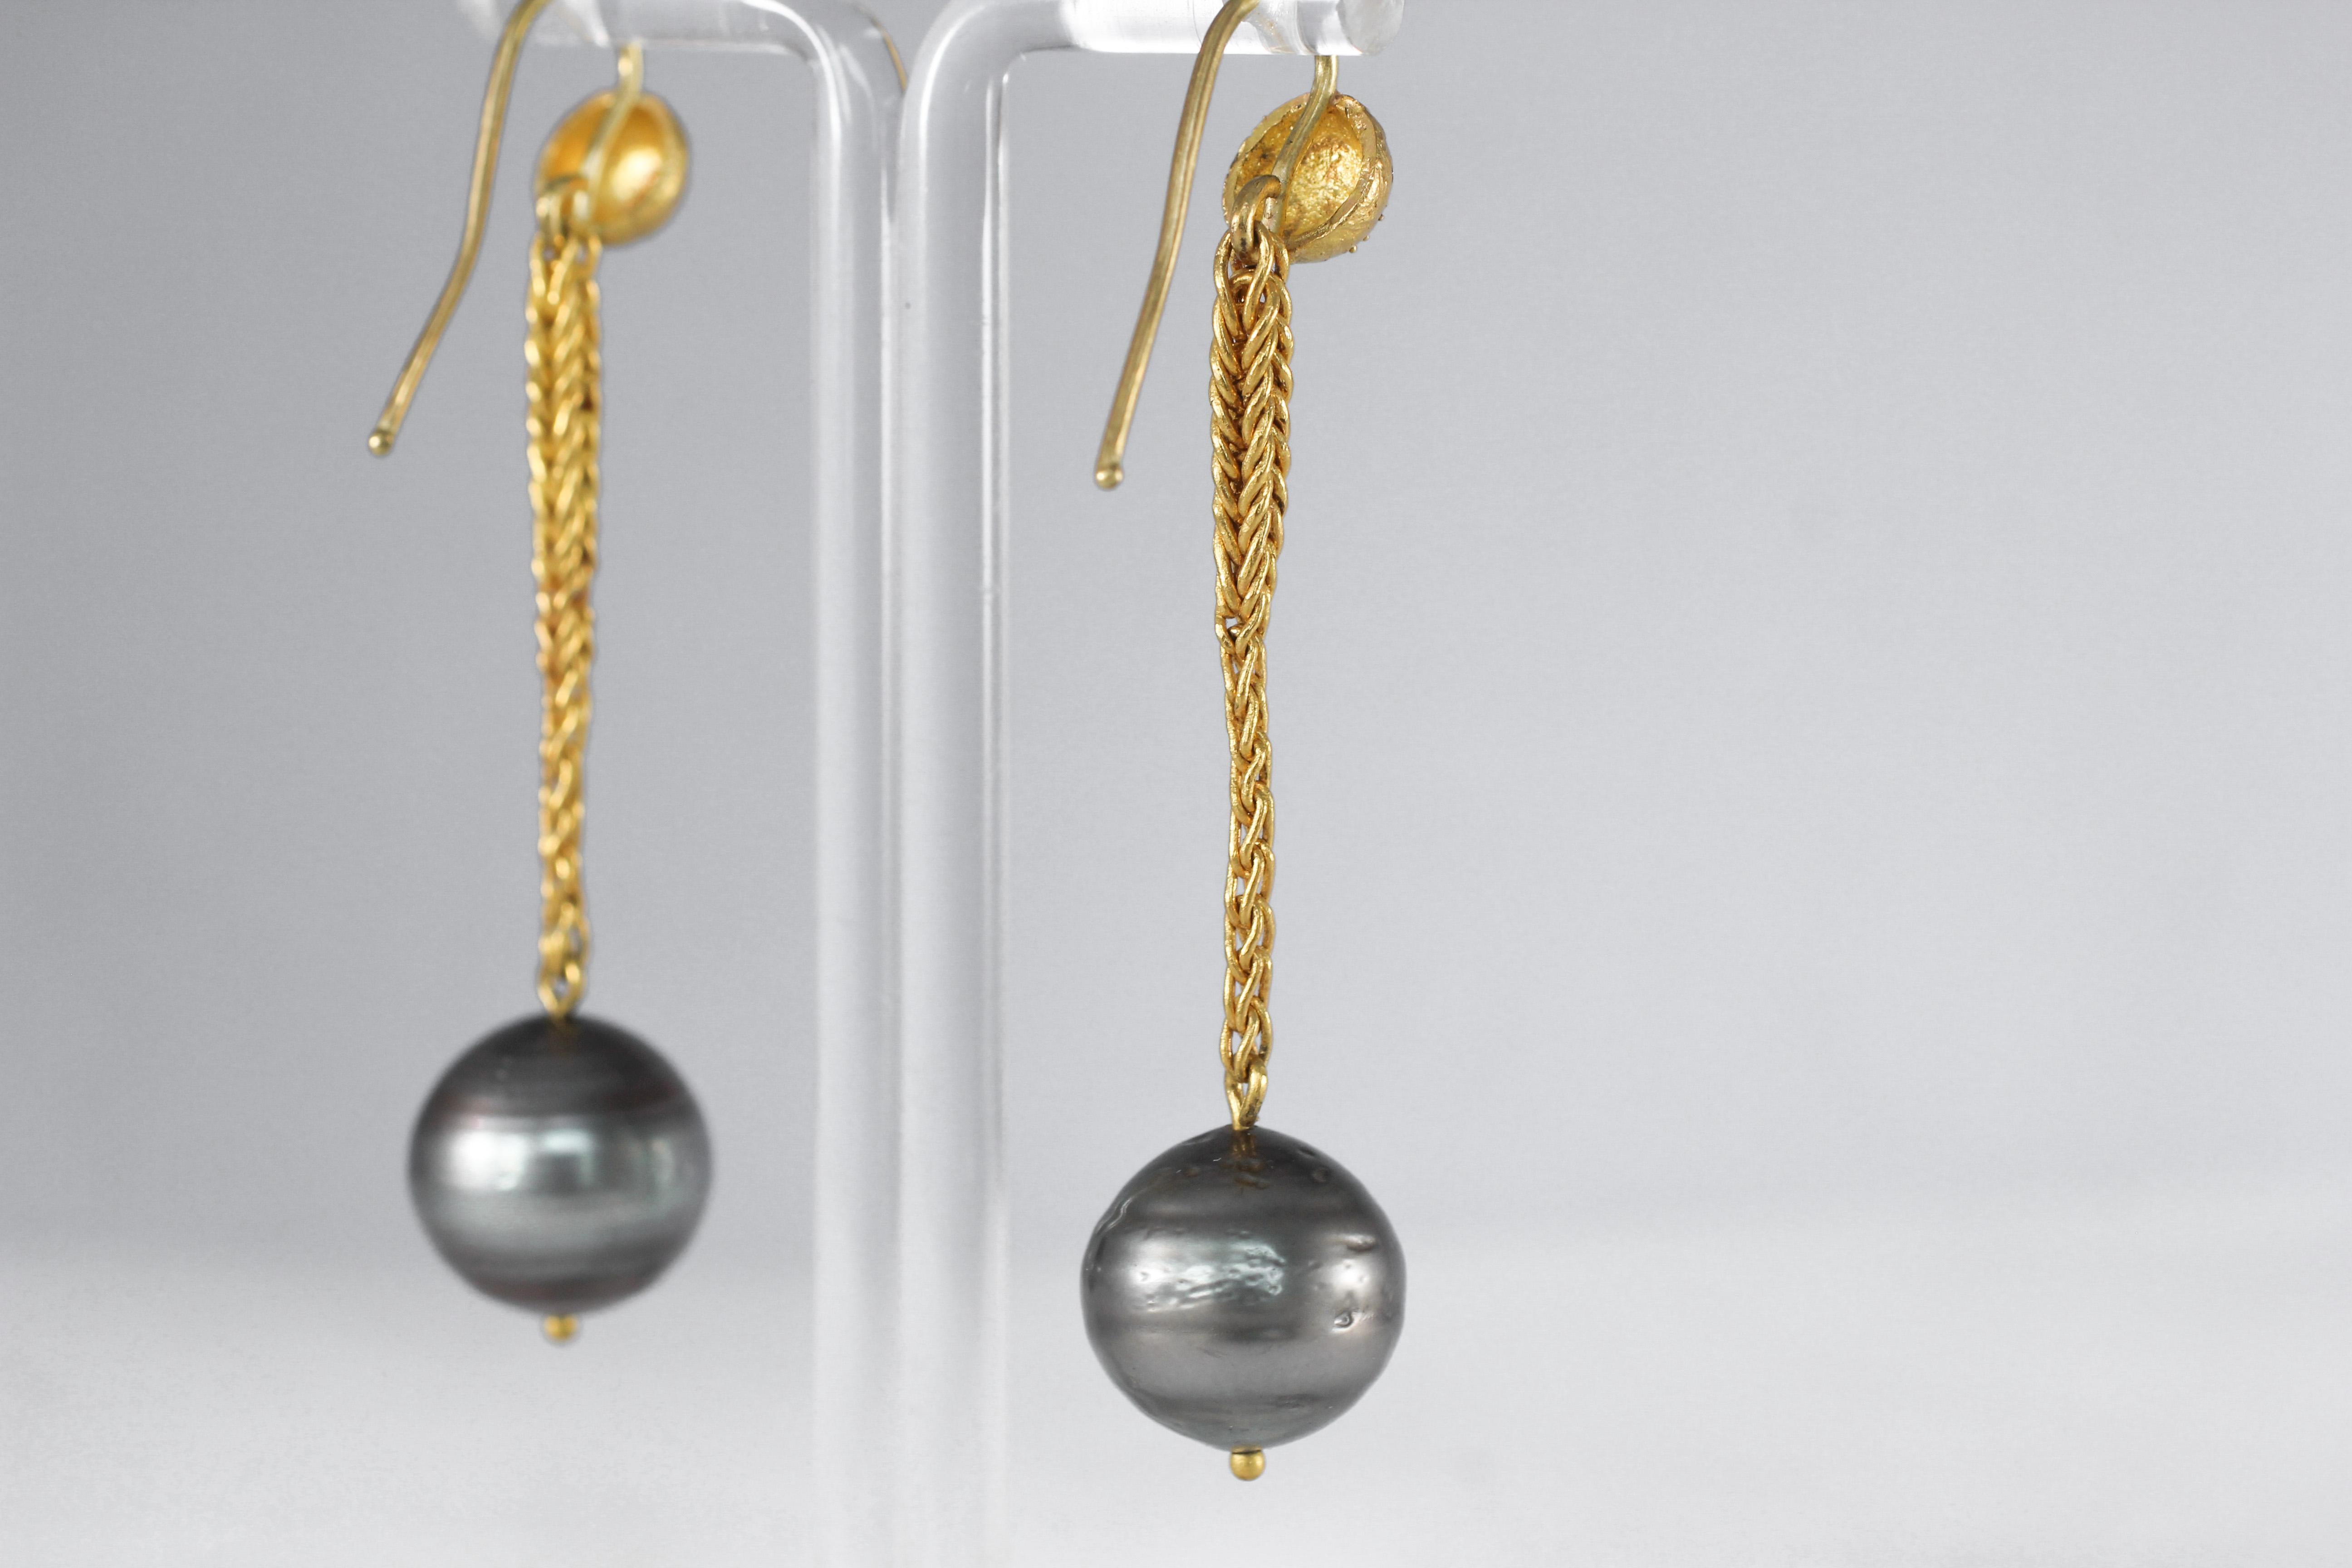 Midnight Pearls Earrings. Simple, elegant dangle drop earrings. An antiquities twist on a minimal modern design. Easy to wear, easy to match, for any occasion.

Inspired by the manual techniques of jewelry making, chain weaving, introduced by